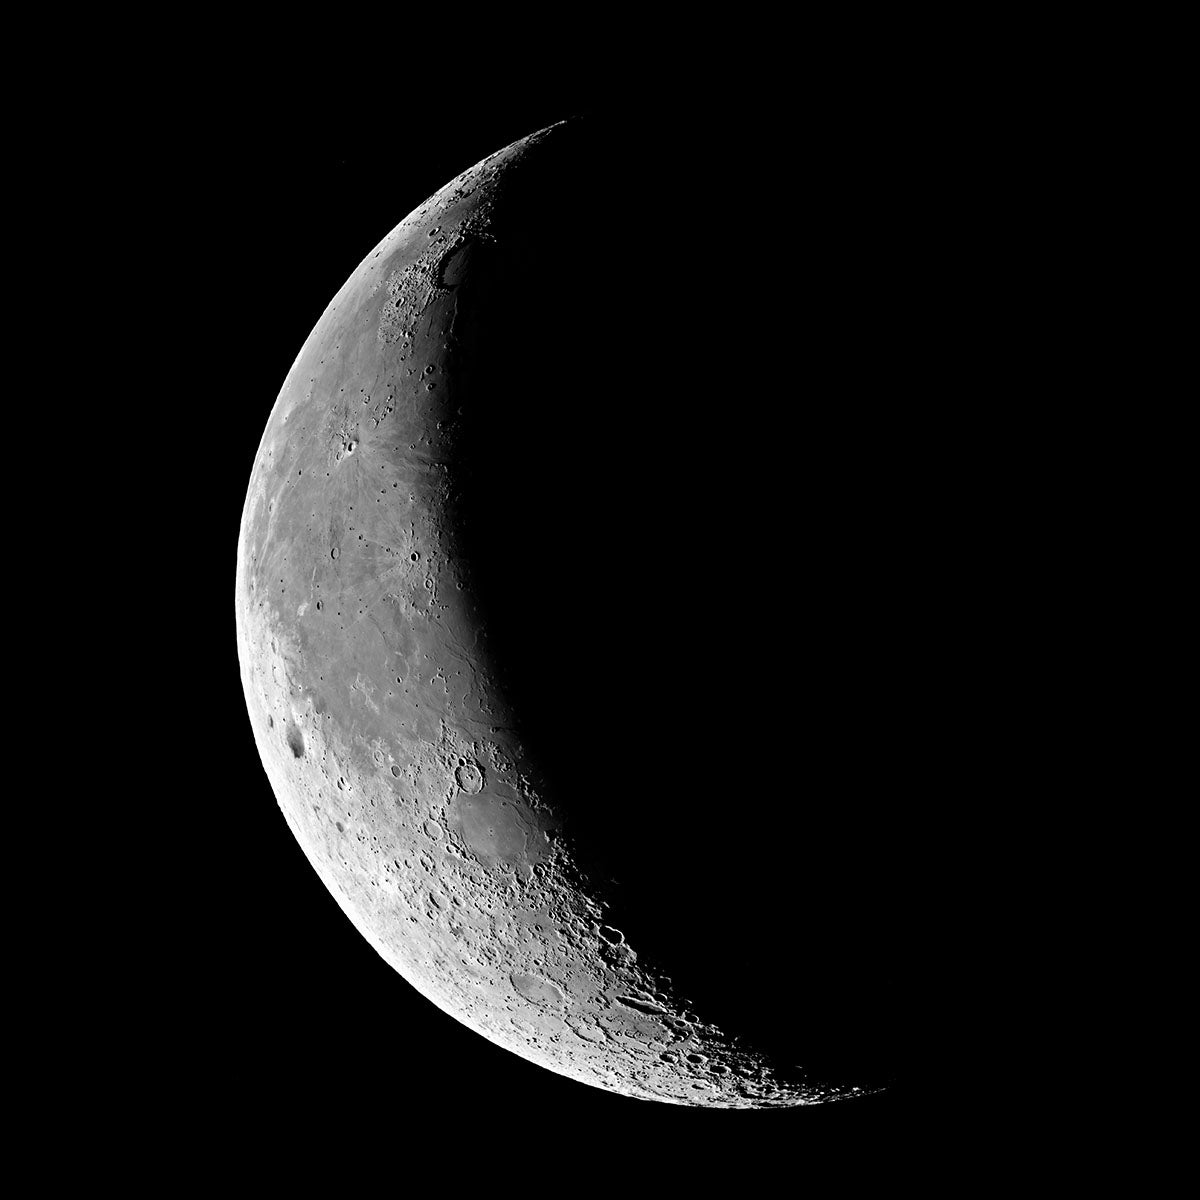 The Waning Crescent Moon Photo Sky Image Lab